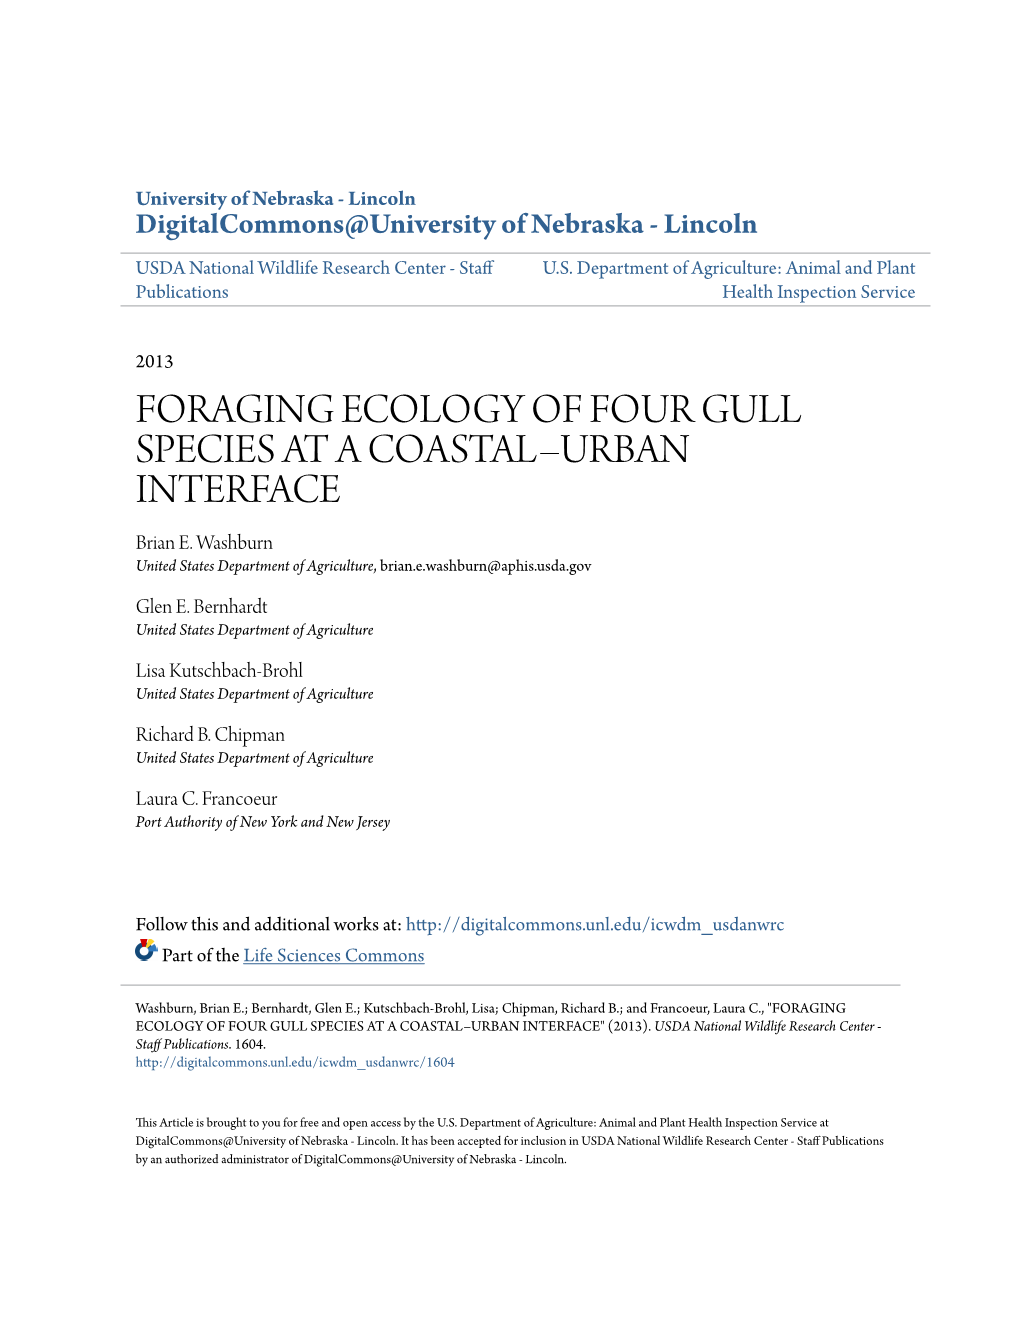 FORAGING ECOLOGY of FOUR GULL SPECIES at a COASTAL–URBAN INTERFACE Brian E